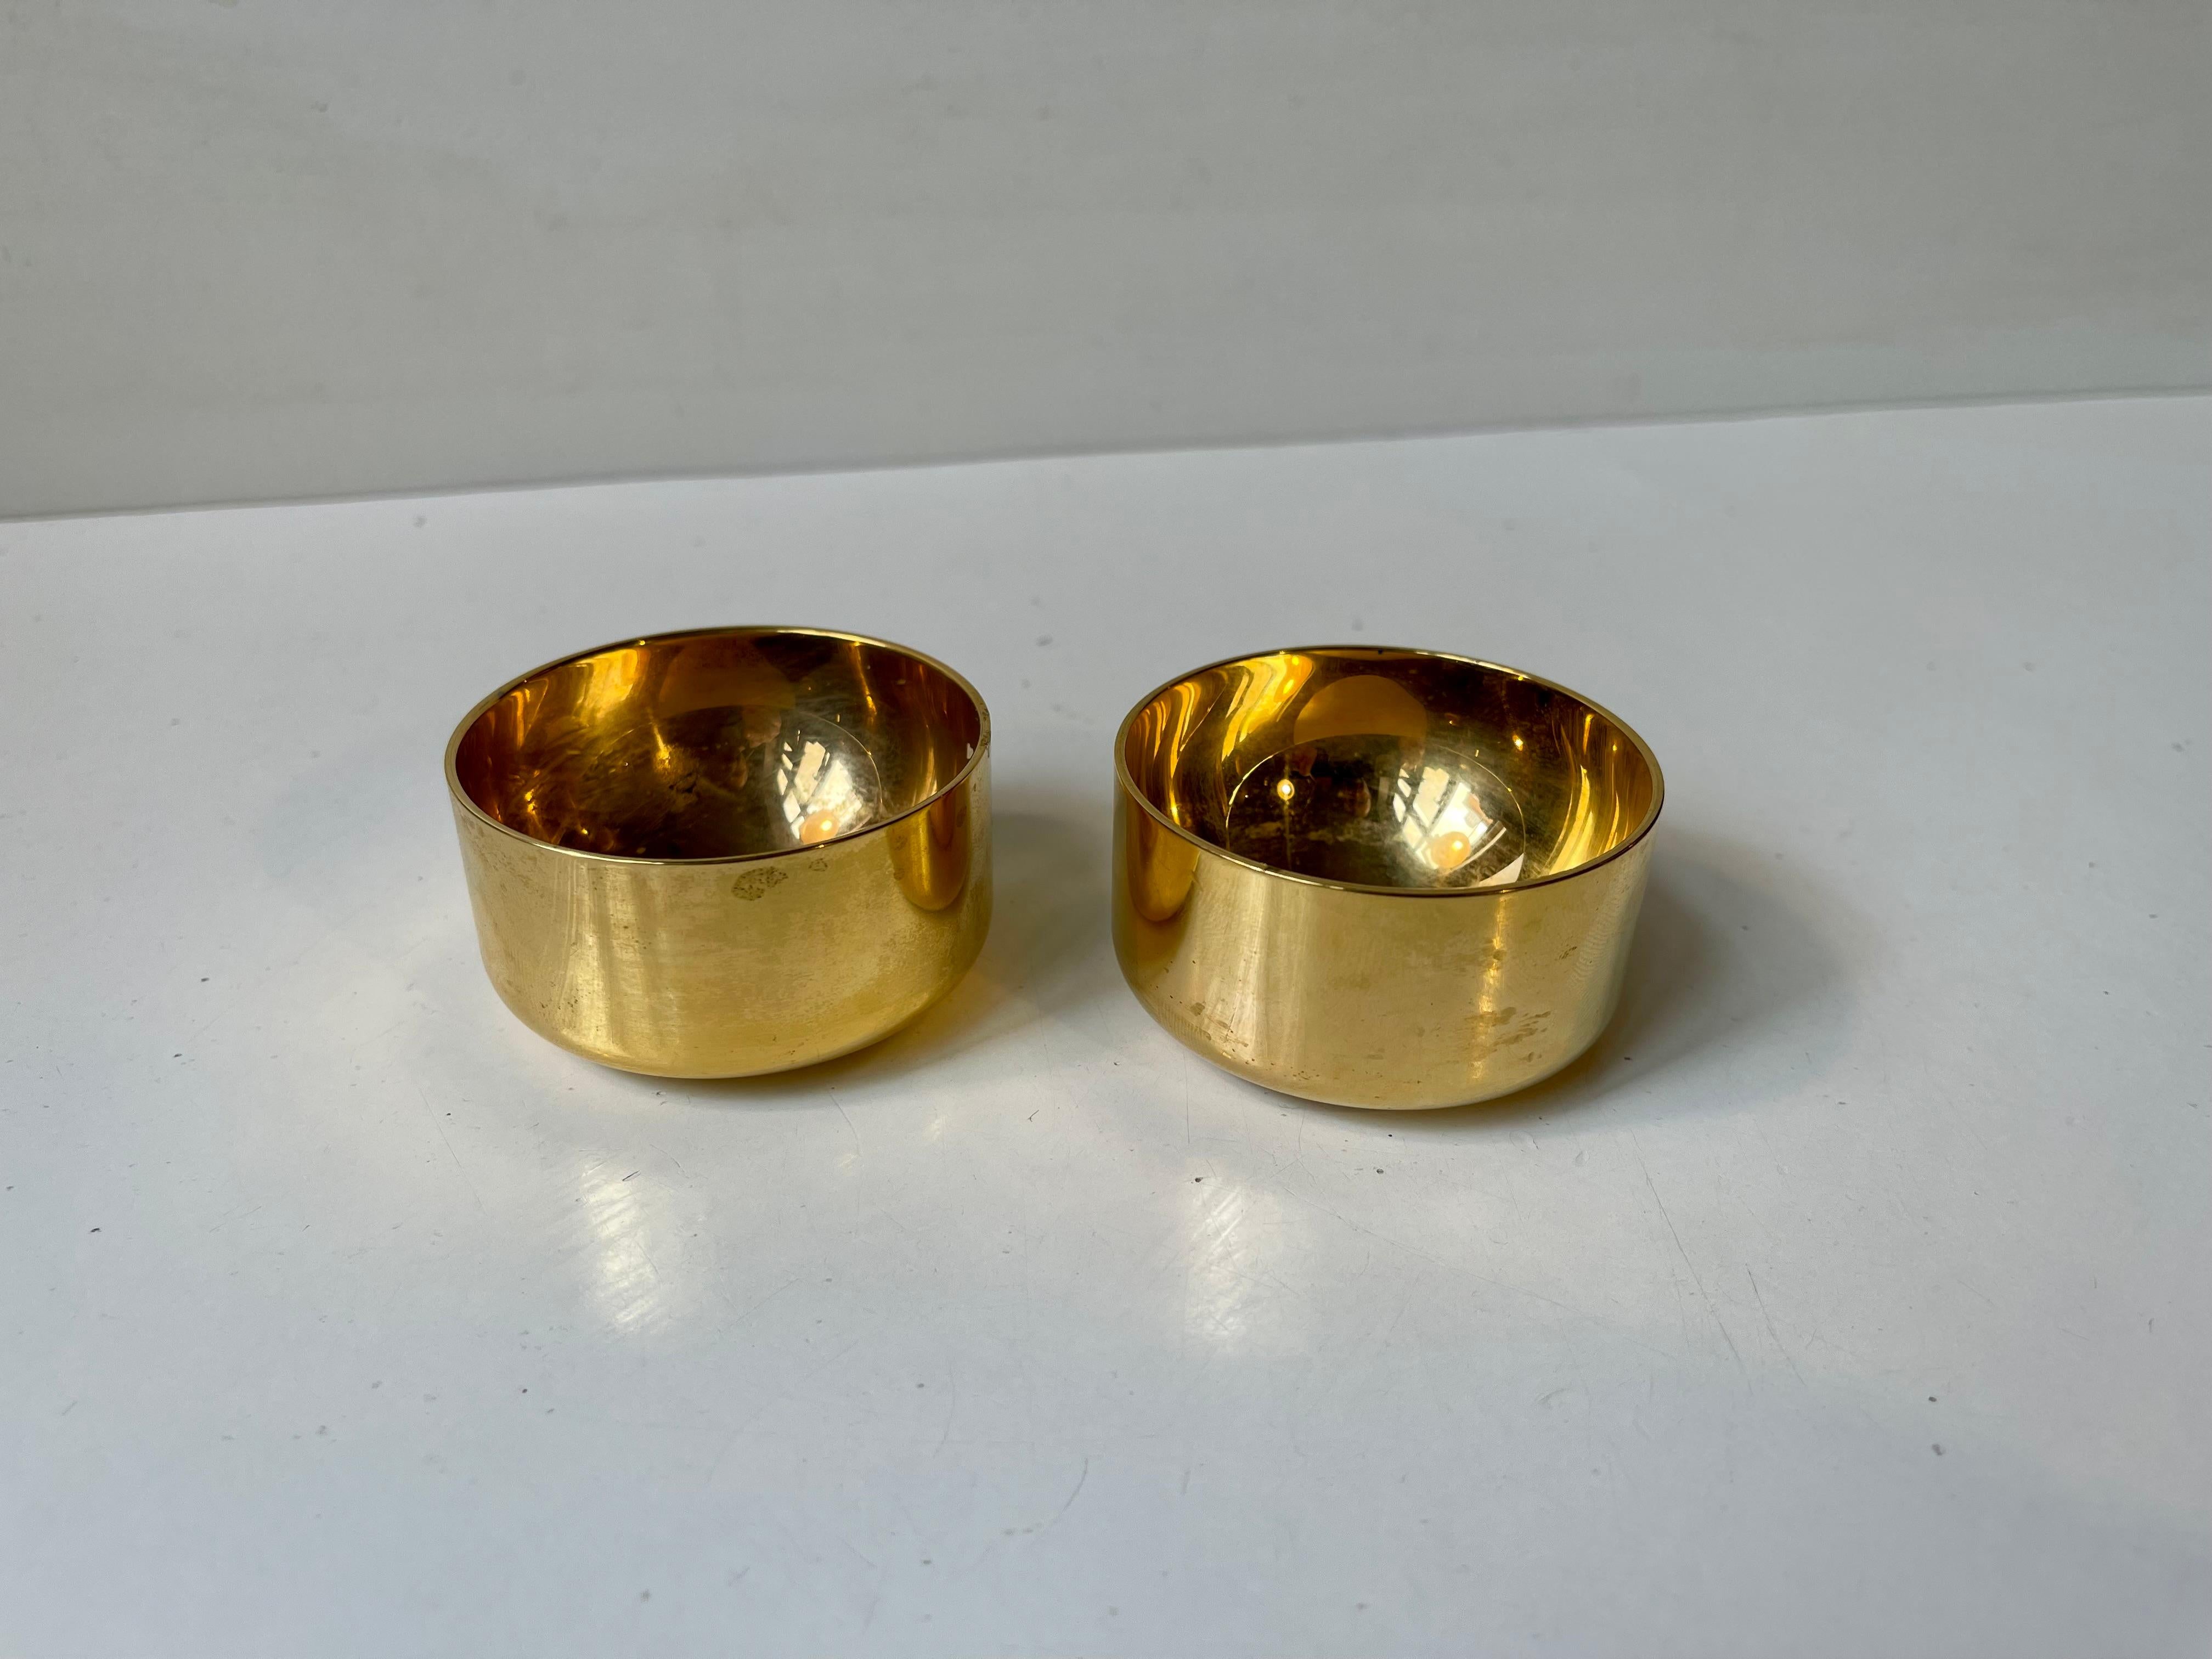 Originally designed as drinking cups/shot glasses these small beauties serve so well as tea light candleholders. They are made from gold plated metal and has a small blue unattributed emblem to one side. Designed by Pierre Forssell and made by